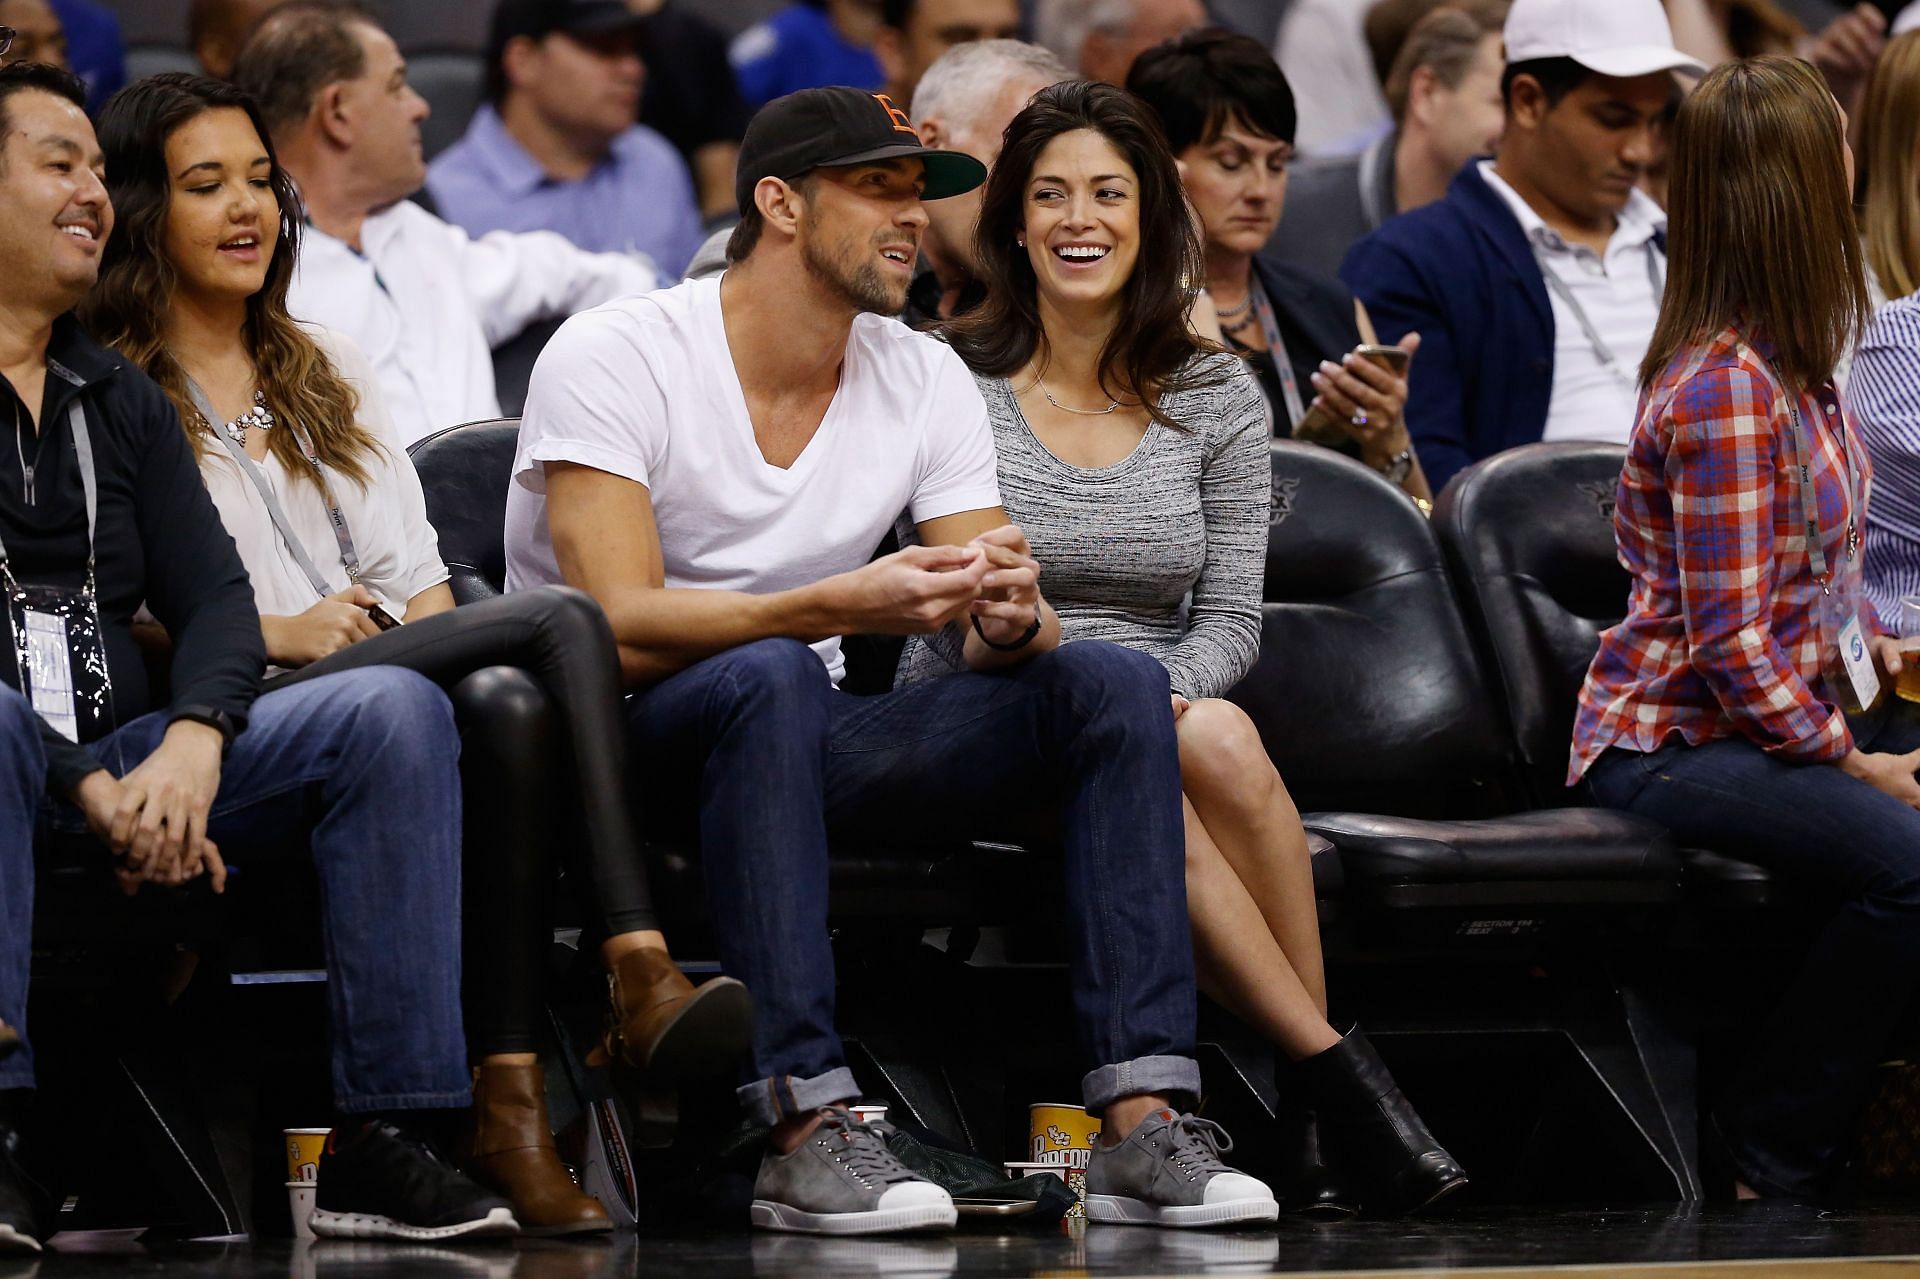 Michael Phelps and Nicole Johnson (Image via Christian Petersen/Getty Images)